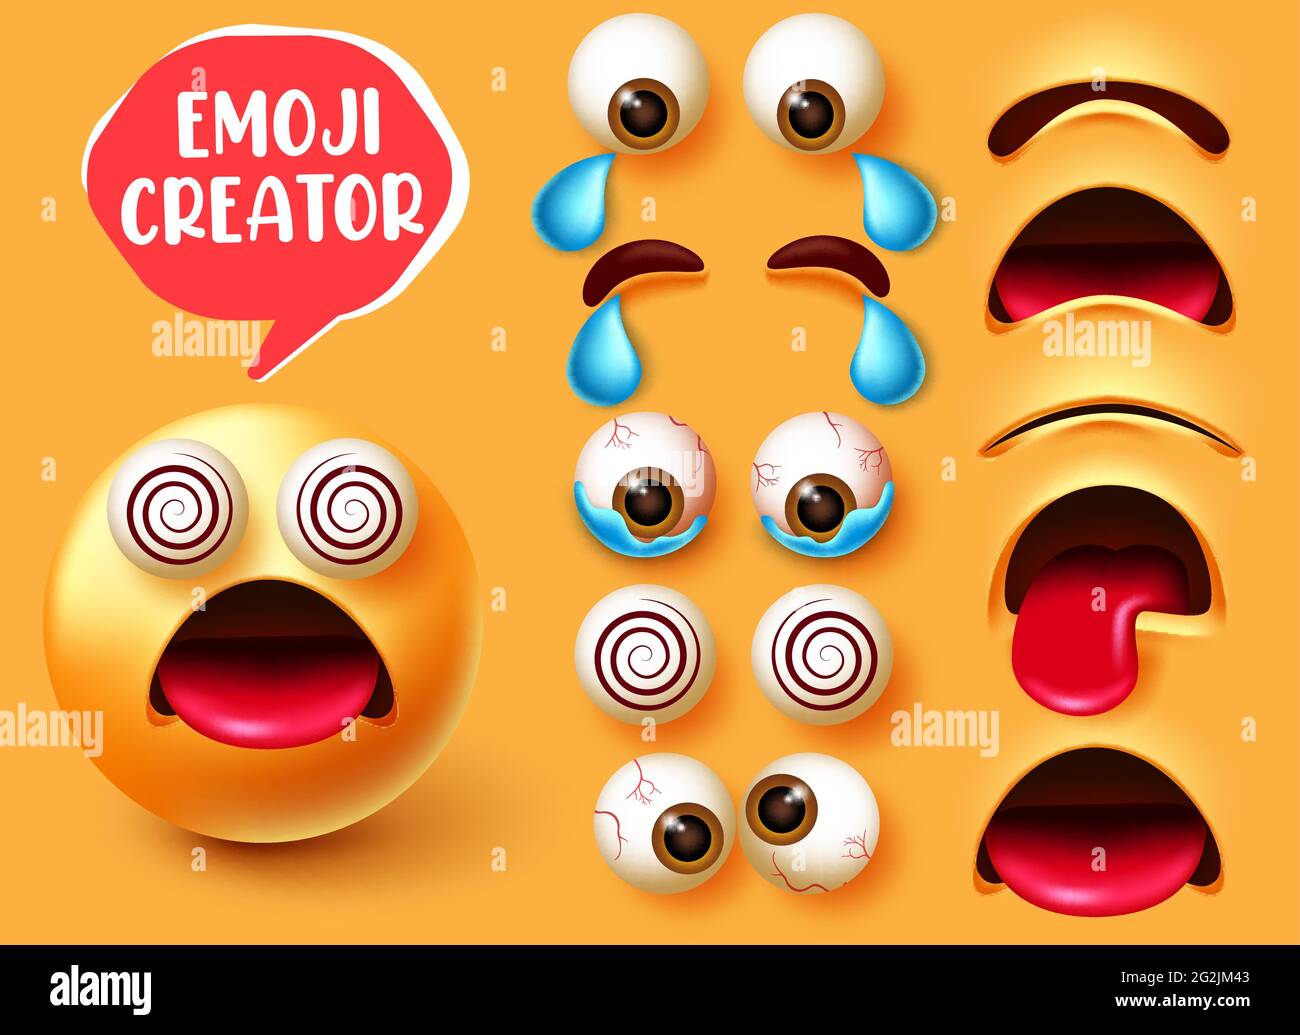 Emoji creator vector set design. Smiley 3d character in dizzy facial expression with editable face elements like eyes and mouth for emojis creation. Stock Vector